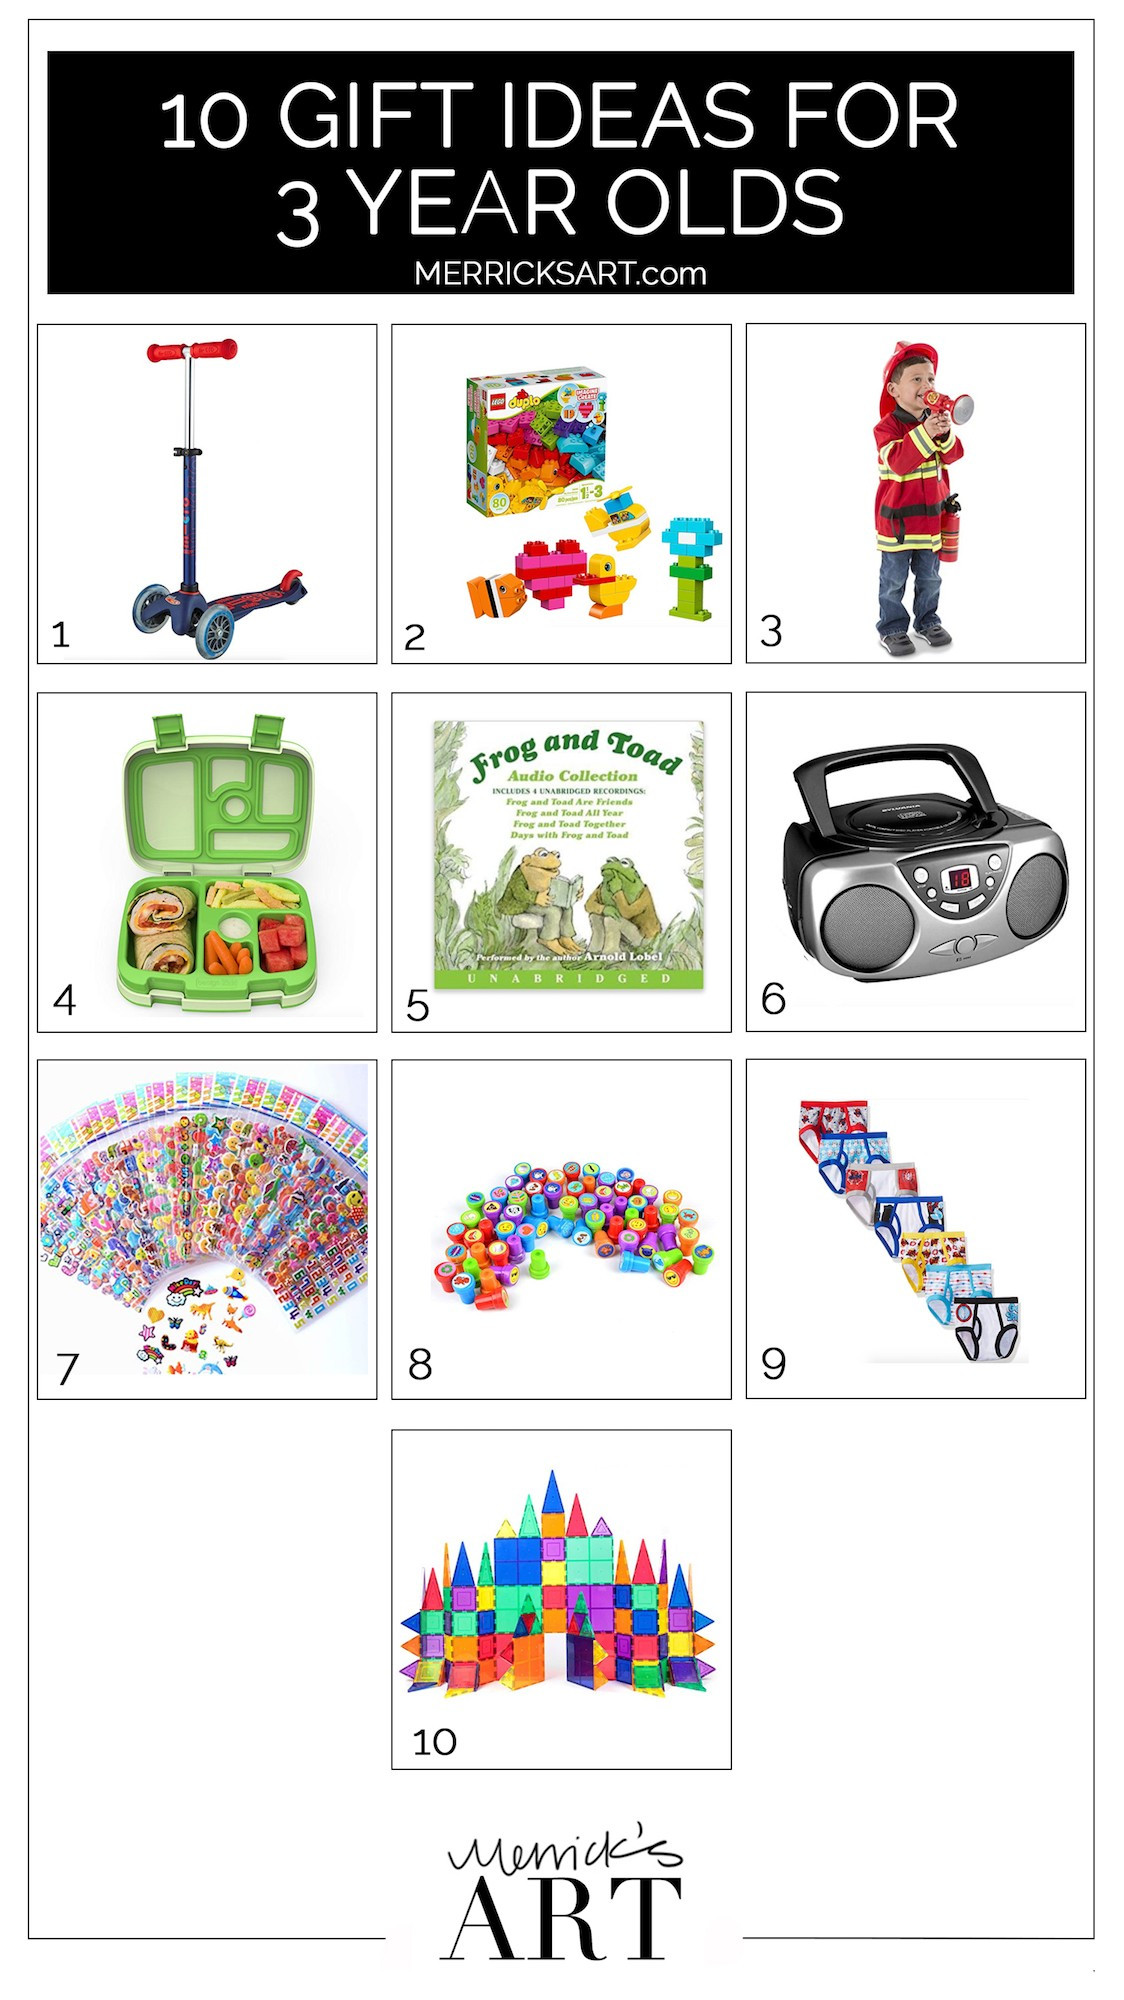 Gift Ideas For 3 Year Old Boys
 10 Birthday Gift Ideas for a 3 Year Old Boy